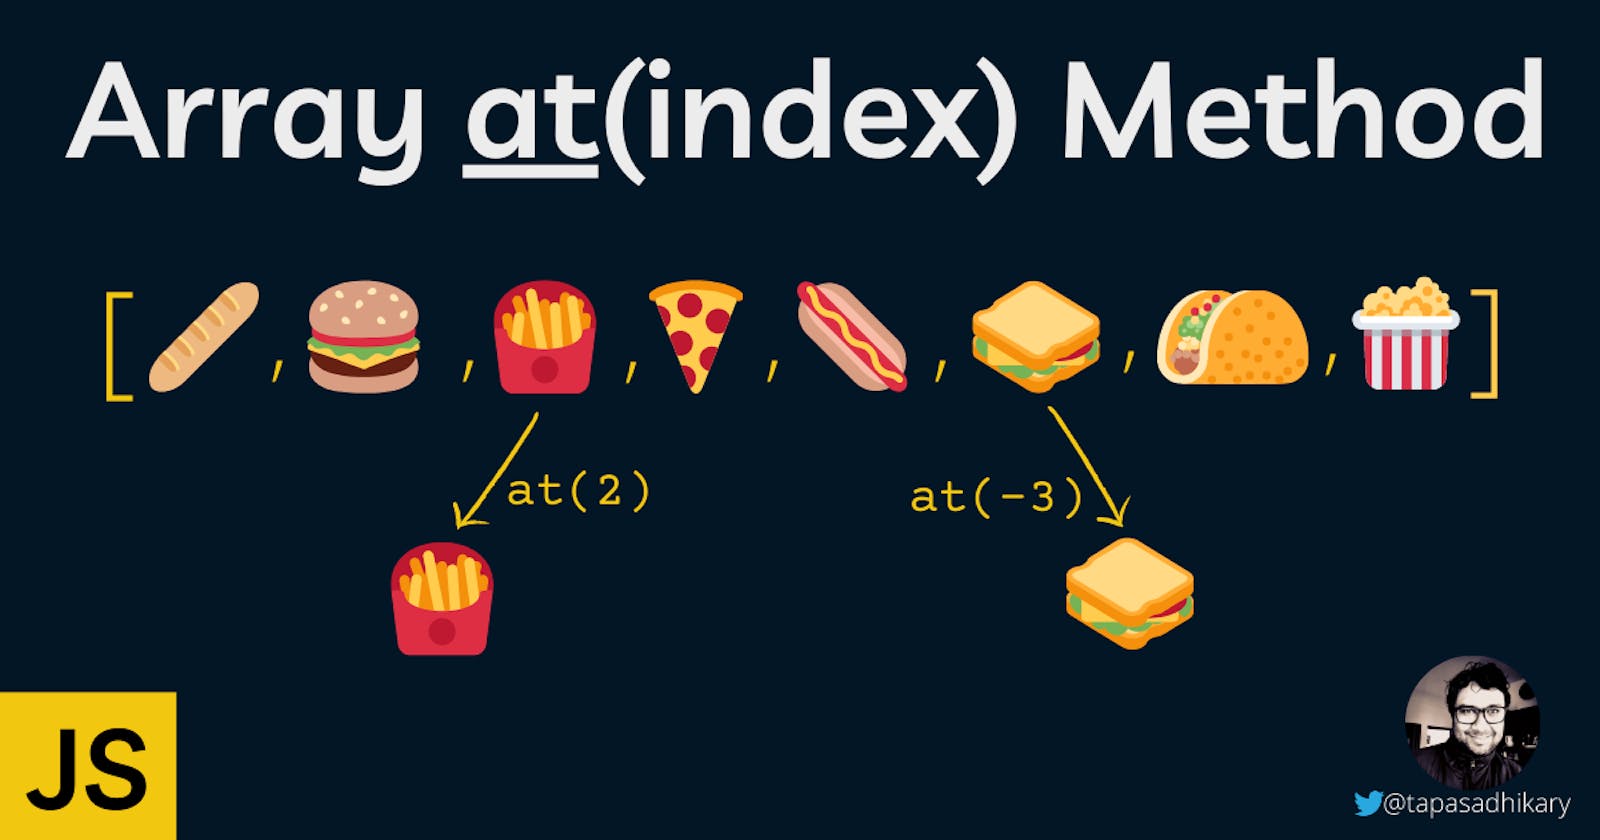 Why do you need to know about the JavaScript Array at() method?